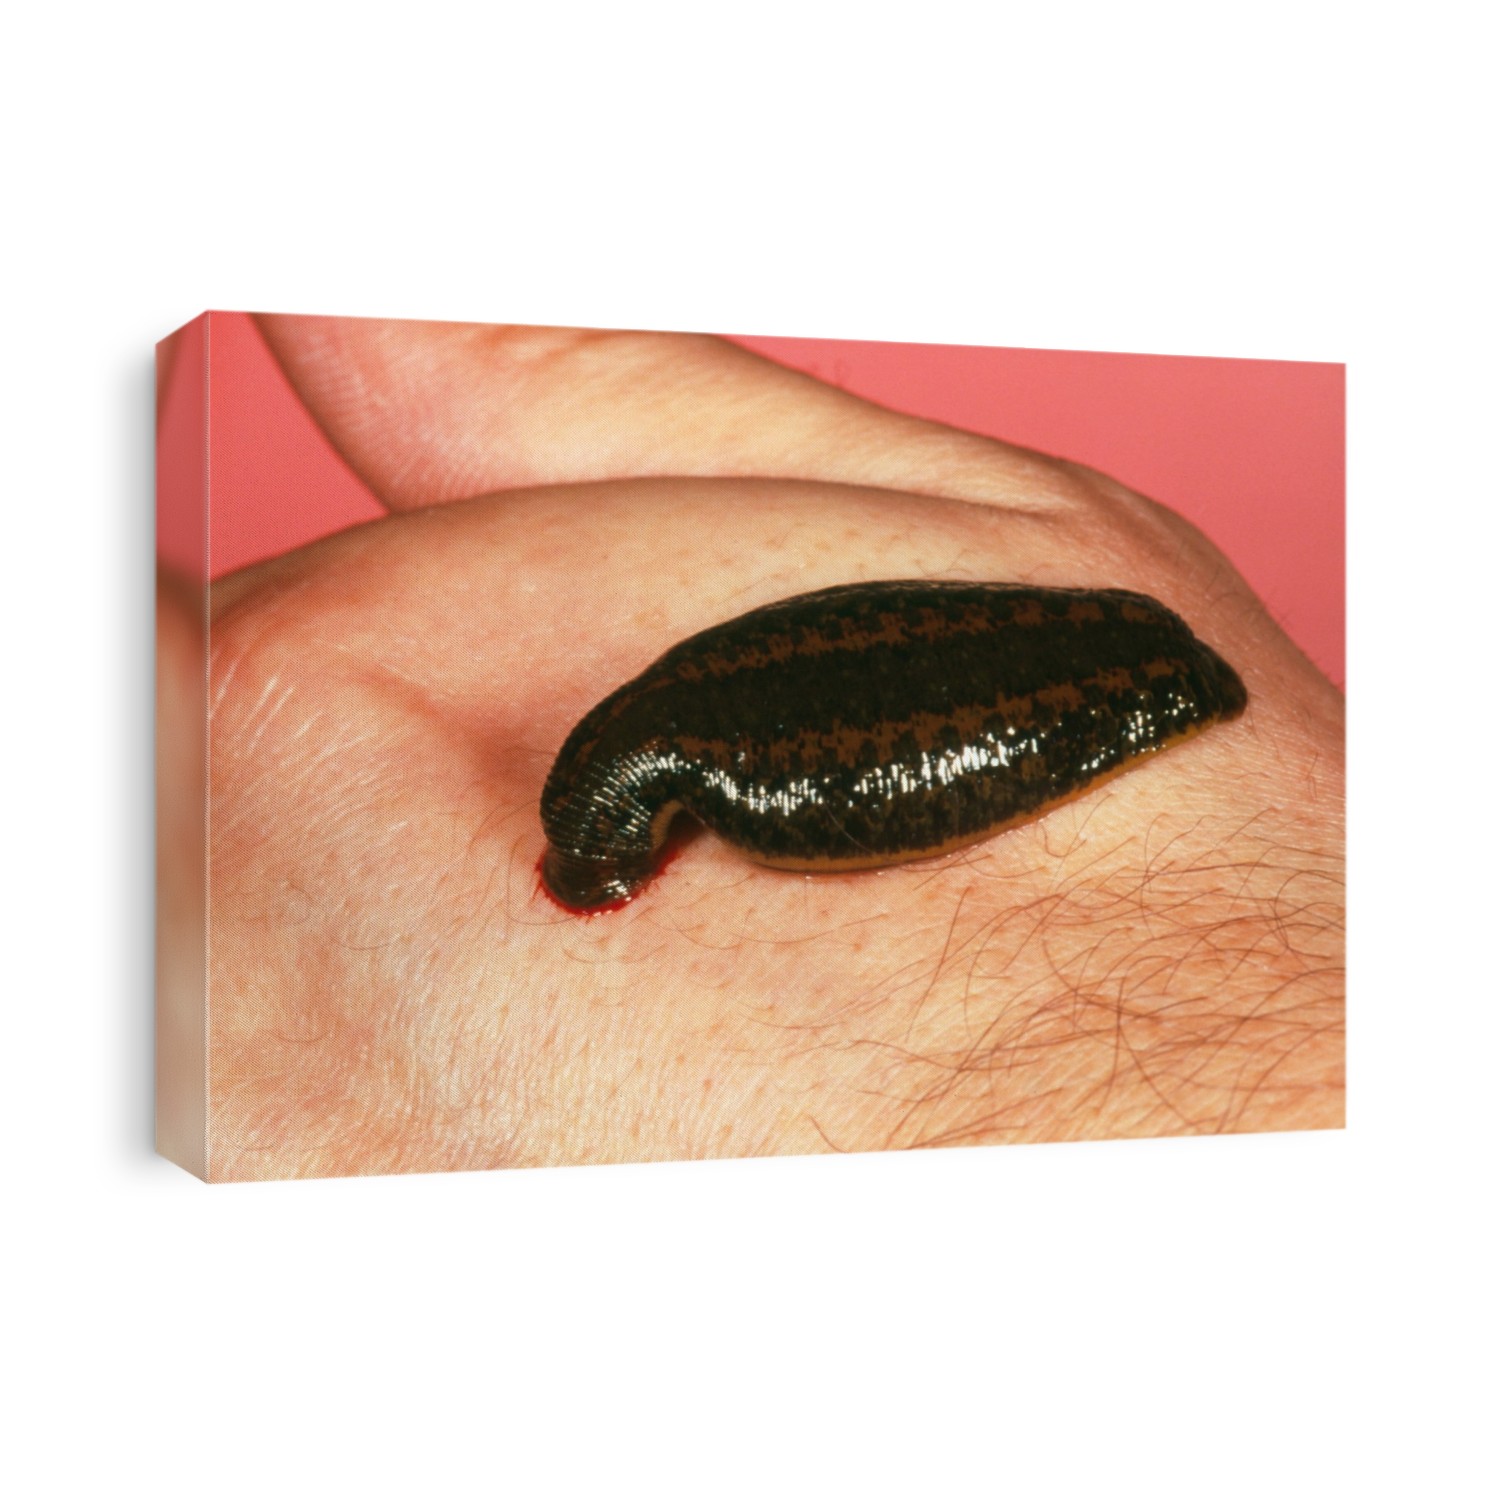 Leech. Medicinal leech (Hirudo medicinalis) feeding on a human hand. Leeches are parasites which feed on blood. They attach themselves to the skin using suckers and create a wound with their three sharp jaw plates. Their saliva contains hirudin, a chemical which prevents the blood from clotting. They are used in modern medicine to drain blood from haematomas (accumulations of blood) and to draw blood into transplanted tissues until circulation is established. A leech may drink between 10 and 15 millilitres of blood in one meal, which will feed it for months.